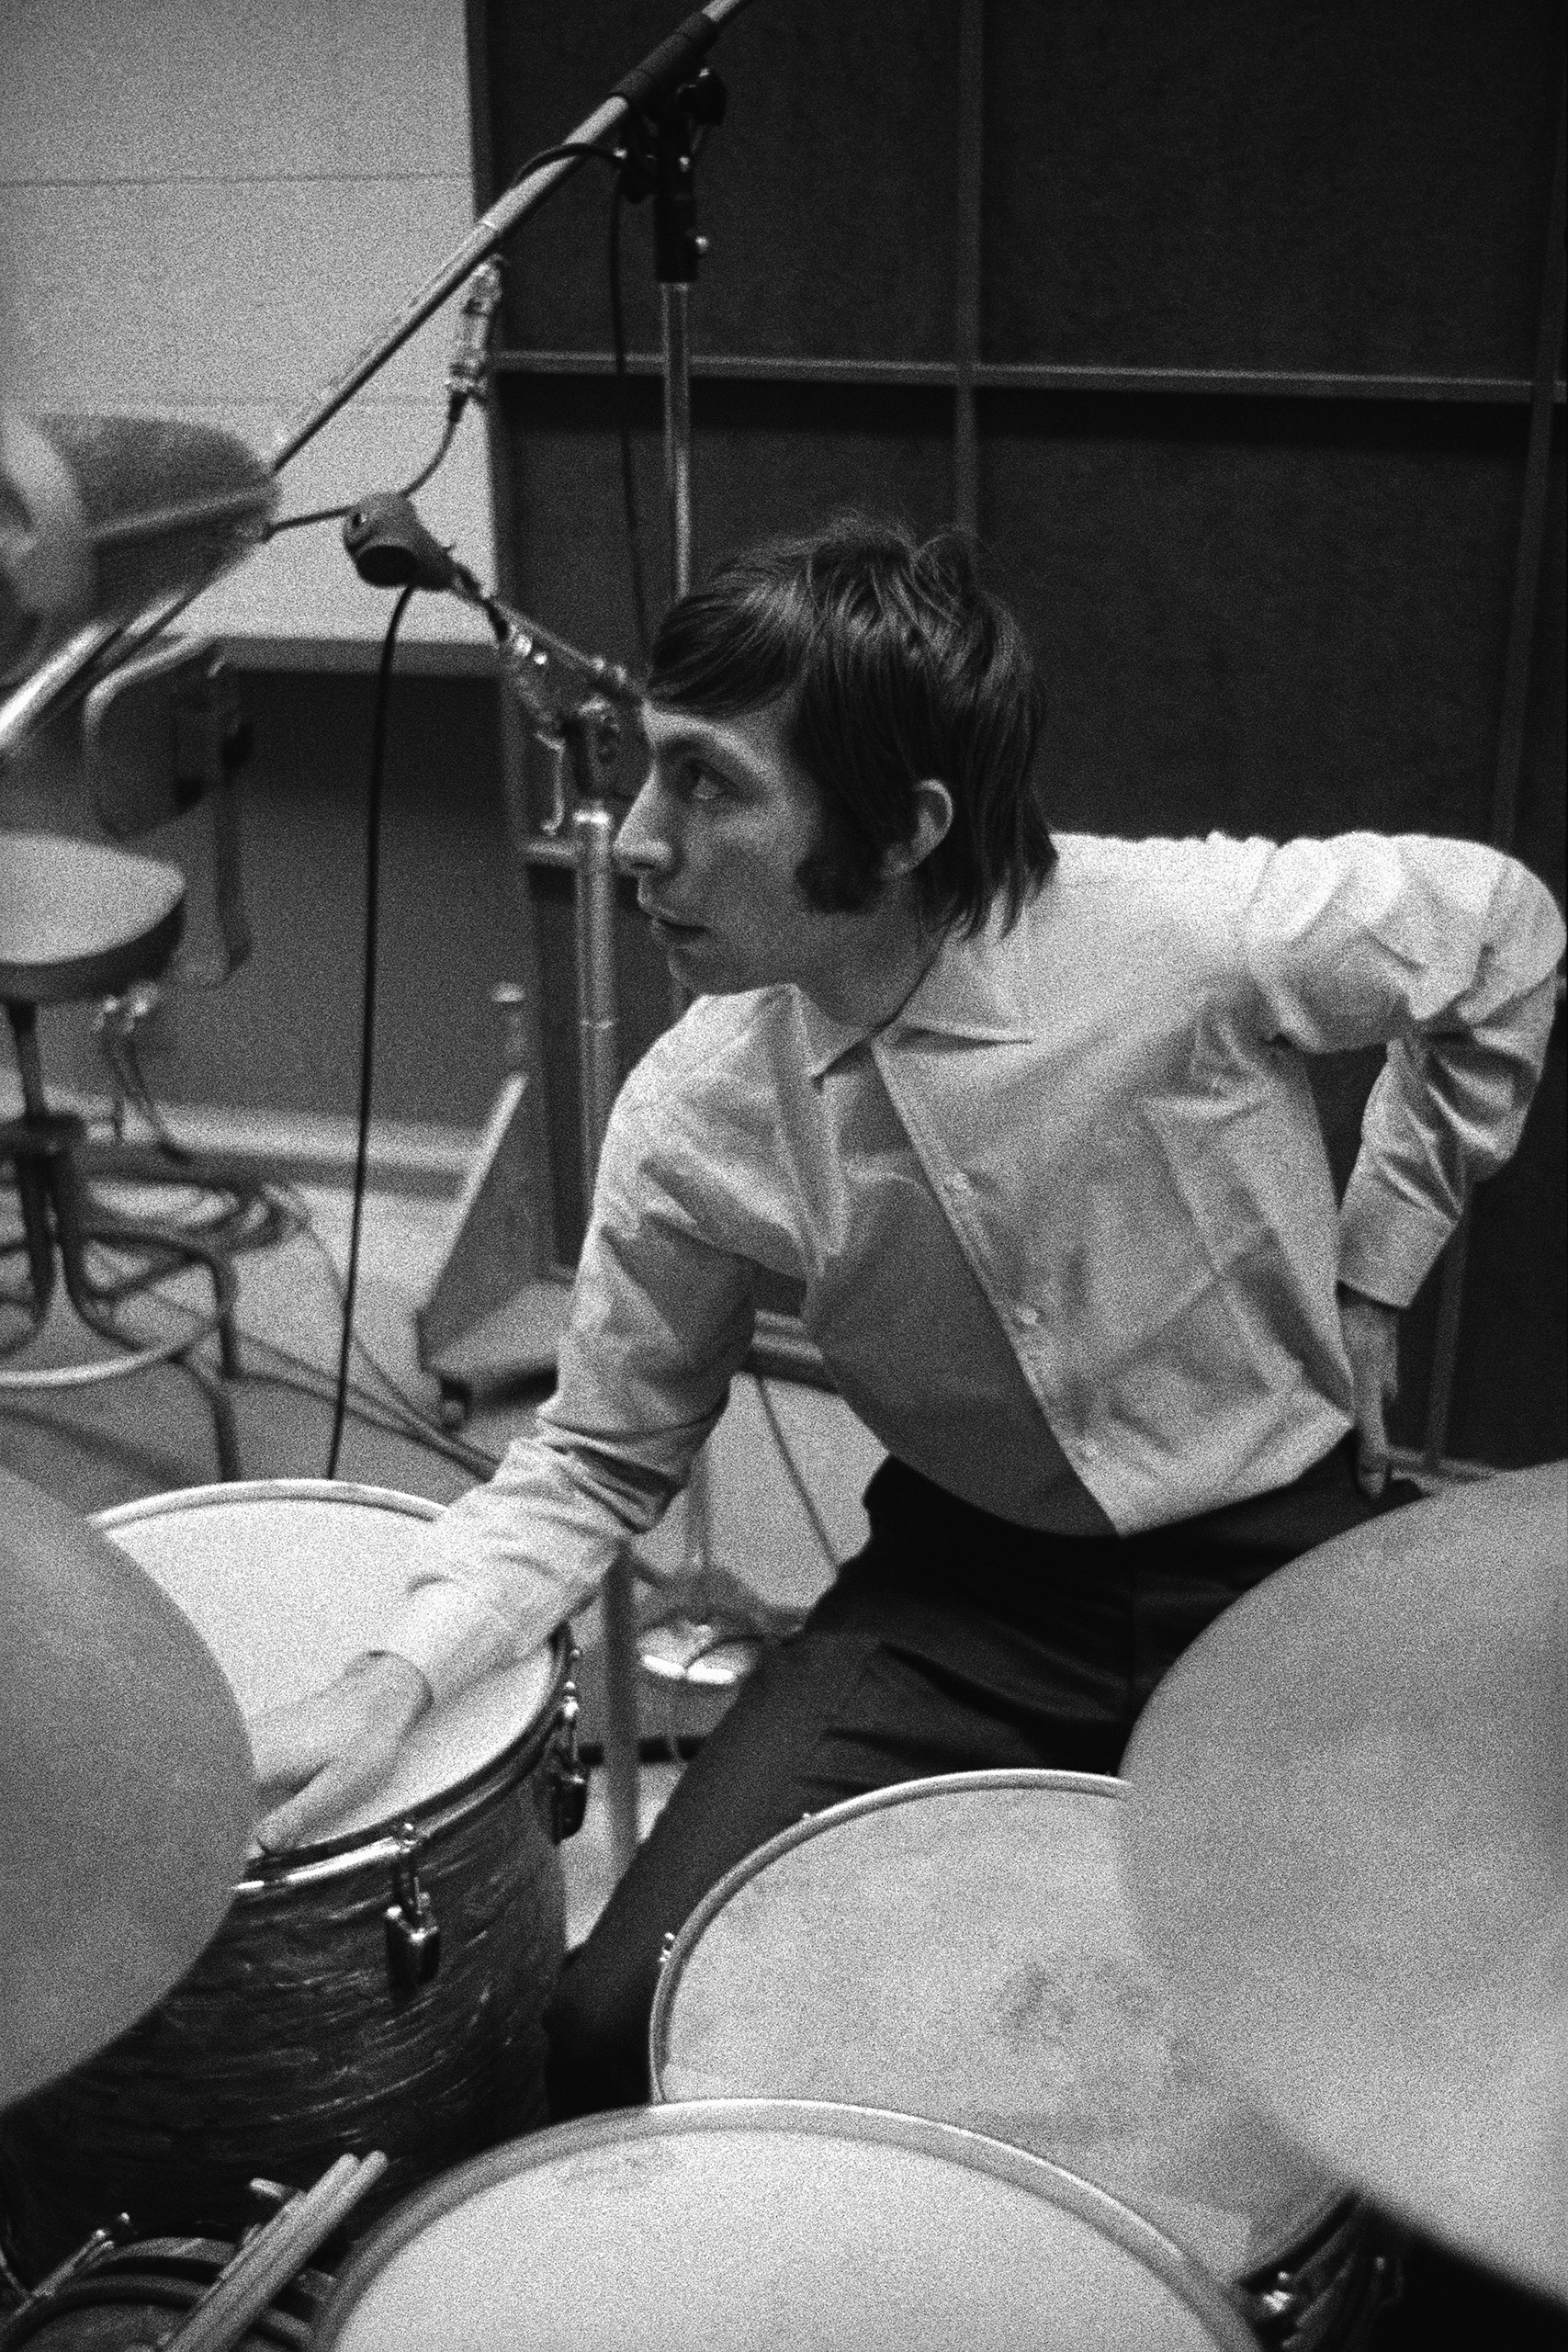 Charlie Watts, drummer for the Rolling Stones. Circa 1963-1965.